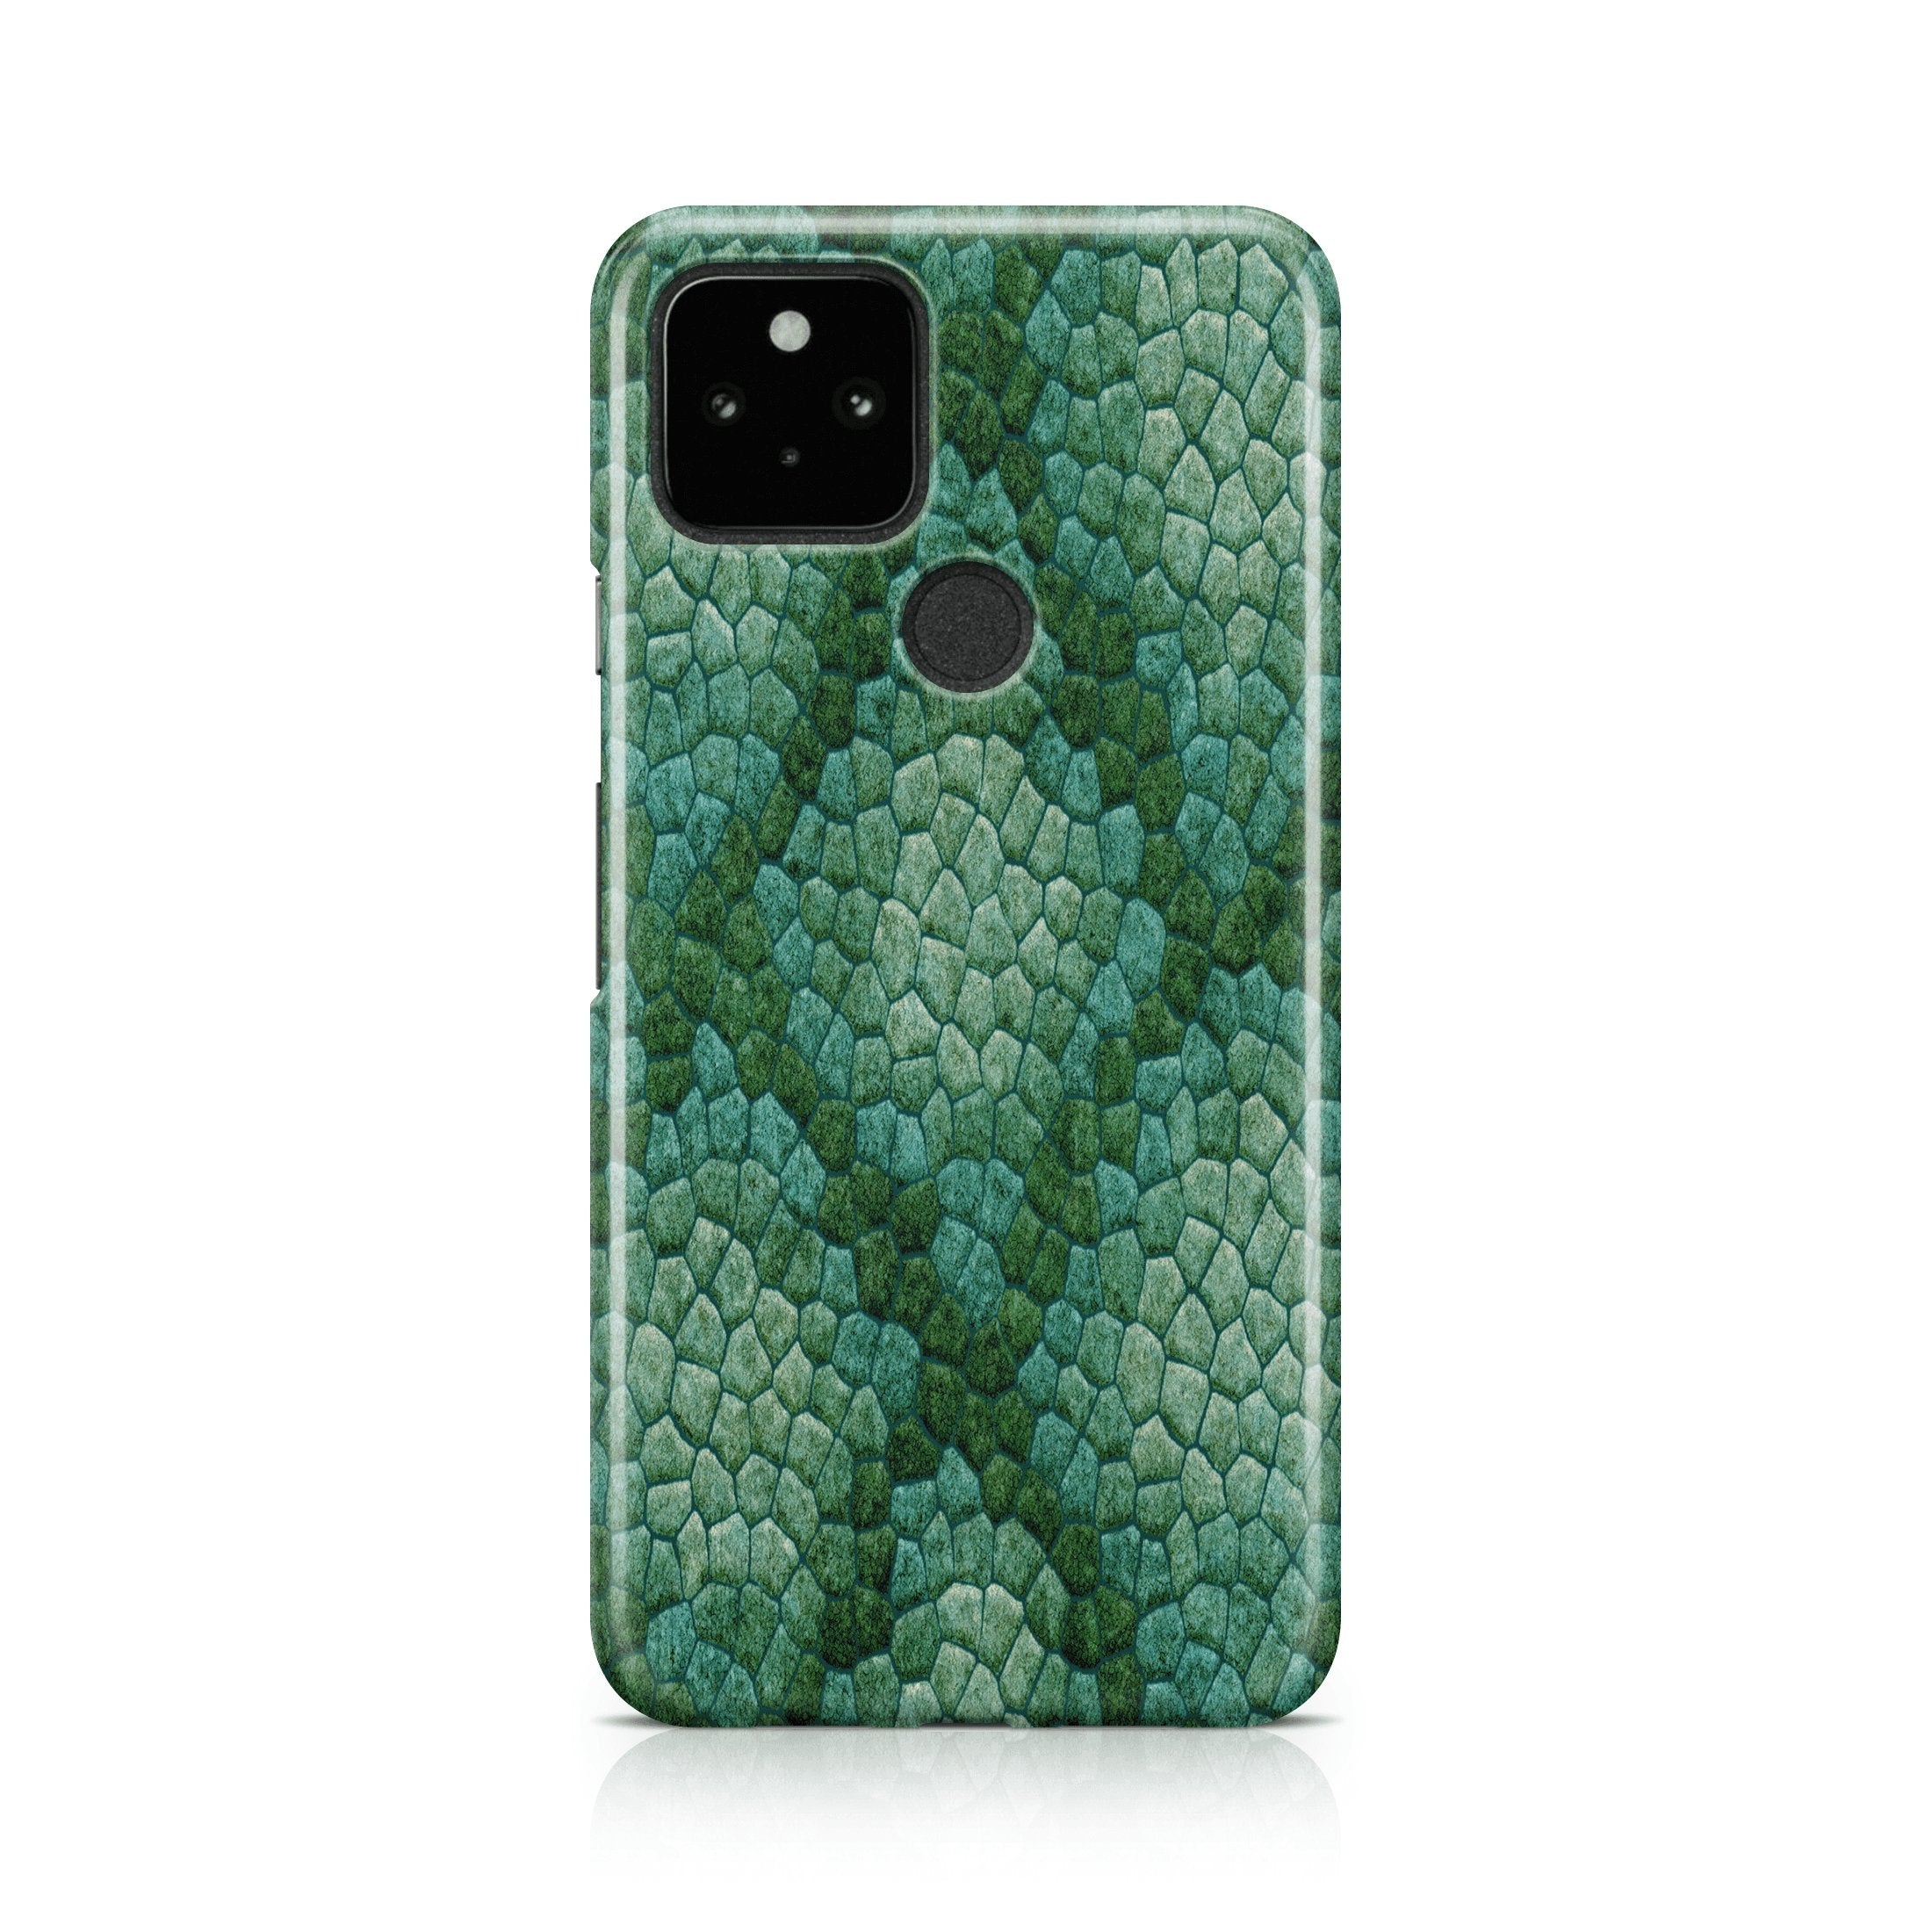 Snakeskin II - Google phone case designs by CaseSwagger